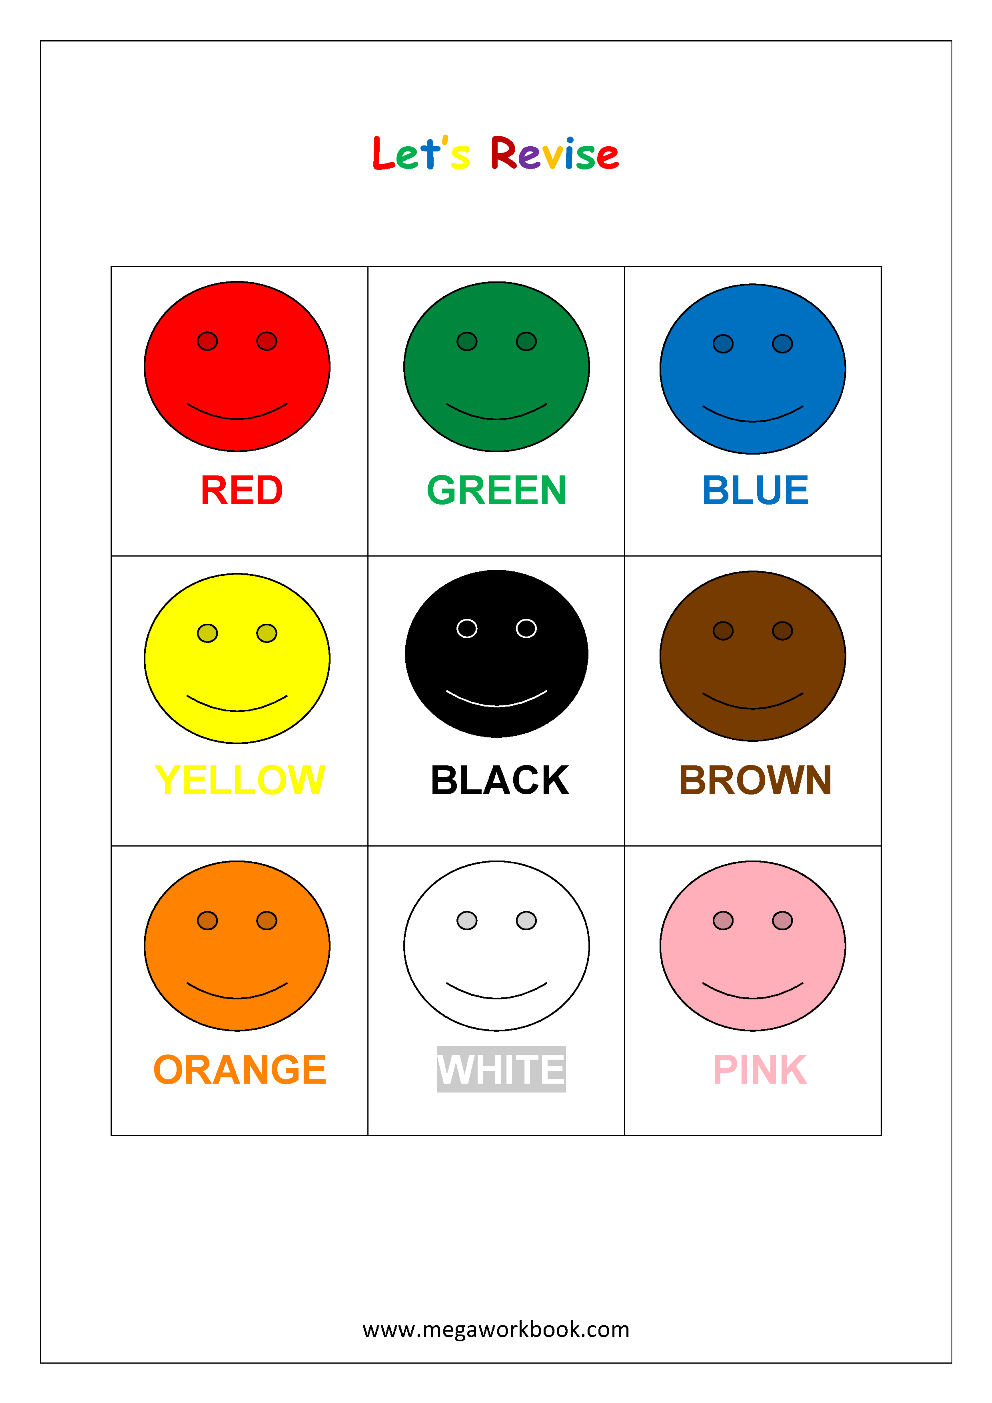 Free Printable Color Recognition Worksheets - Learn Basic Colors | Color Recognition Worksheets Free Printable